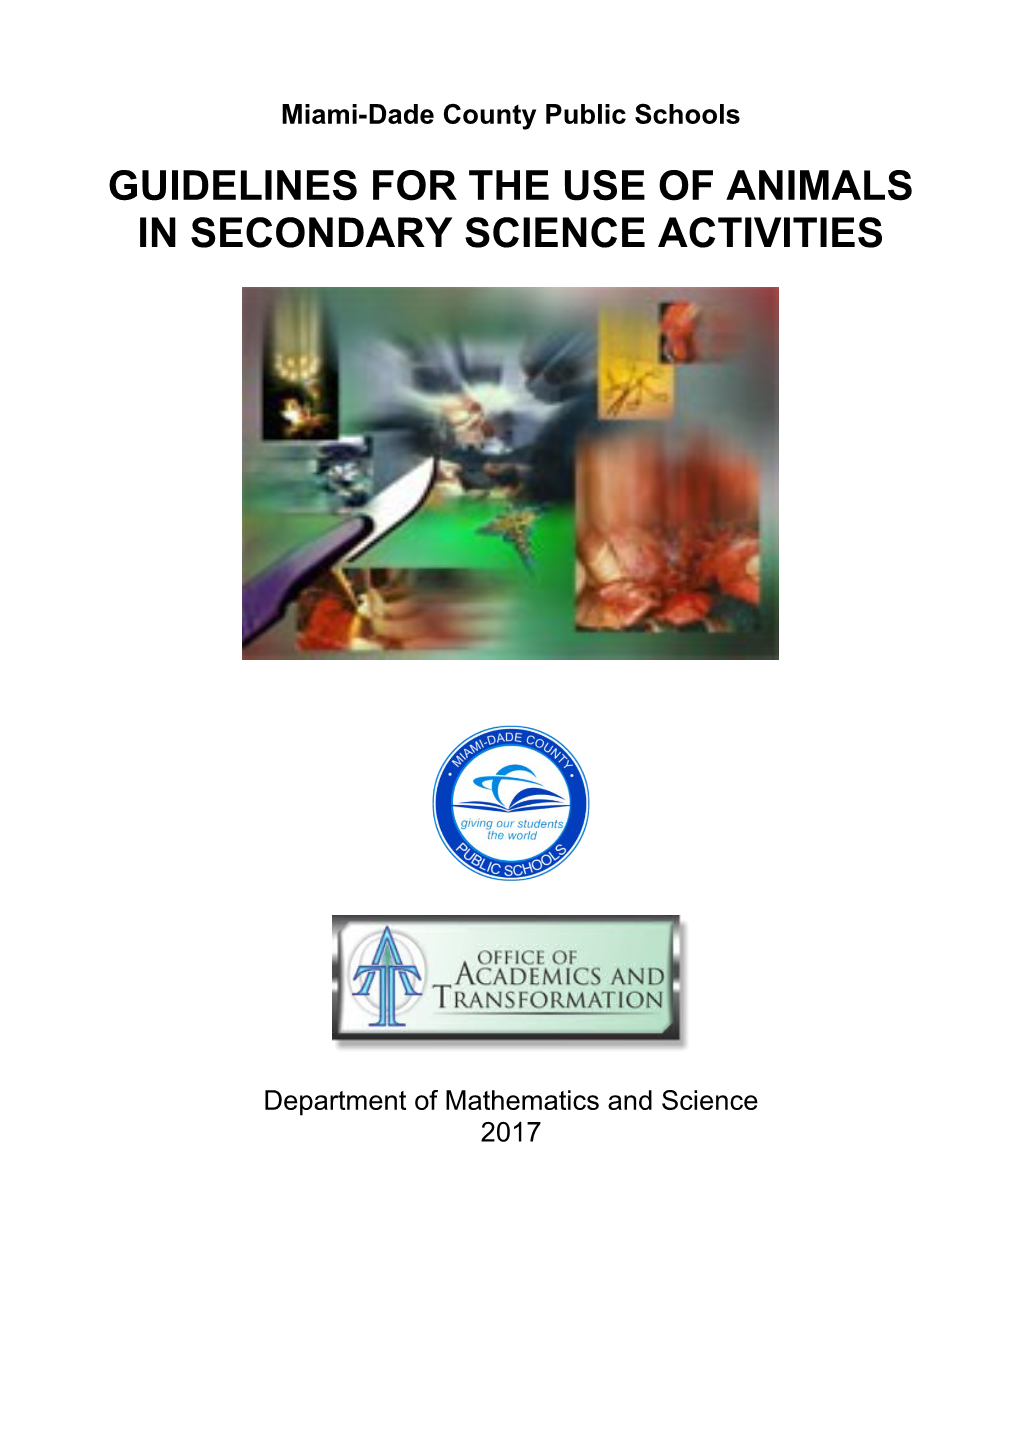 Guidelines for the Use of Animals in Secondary Science Activities